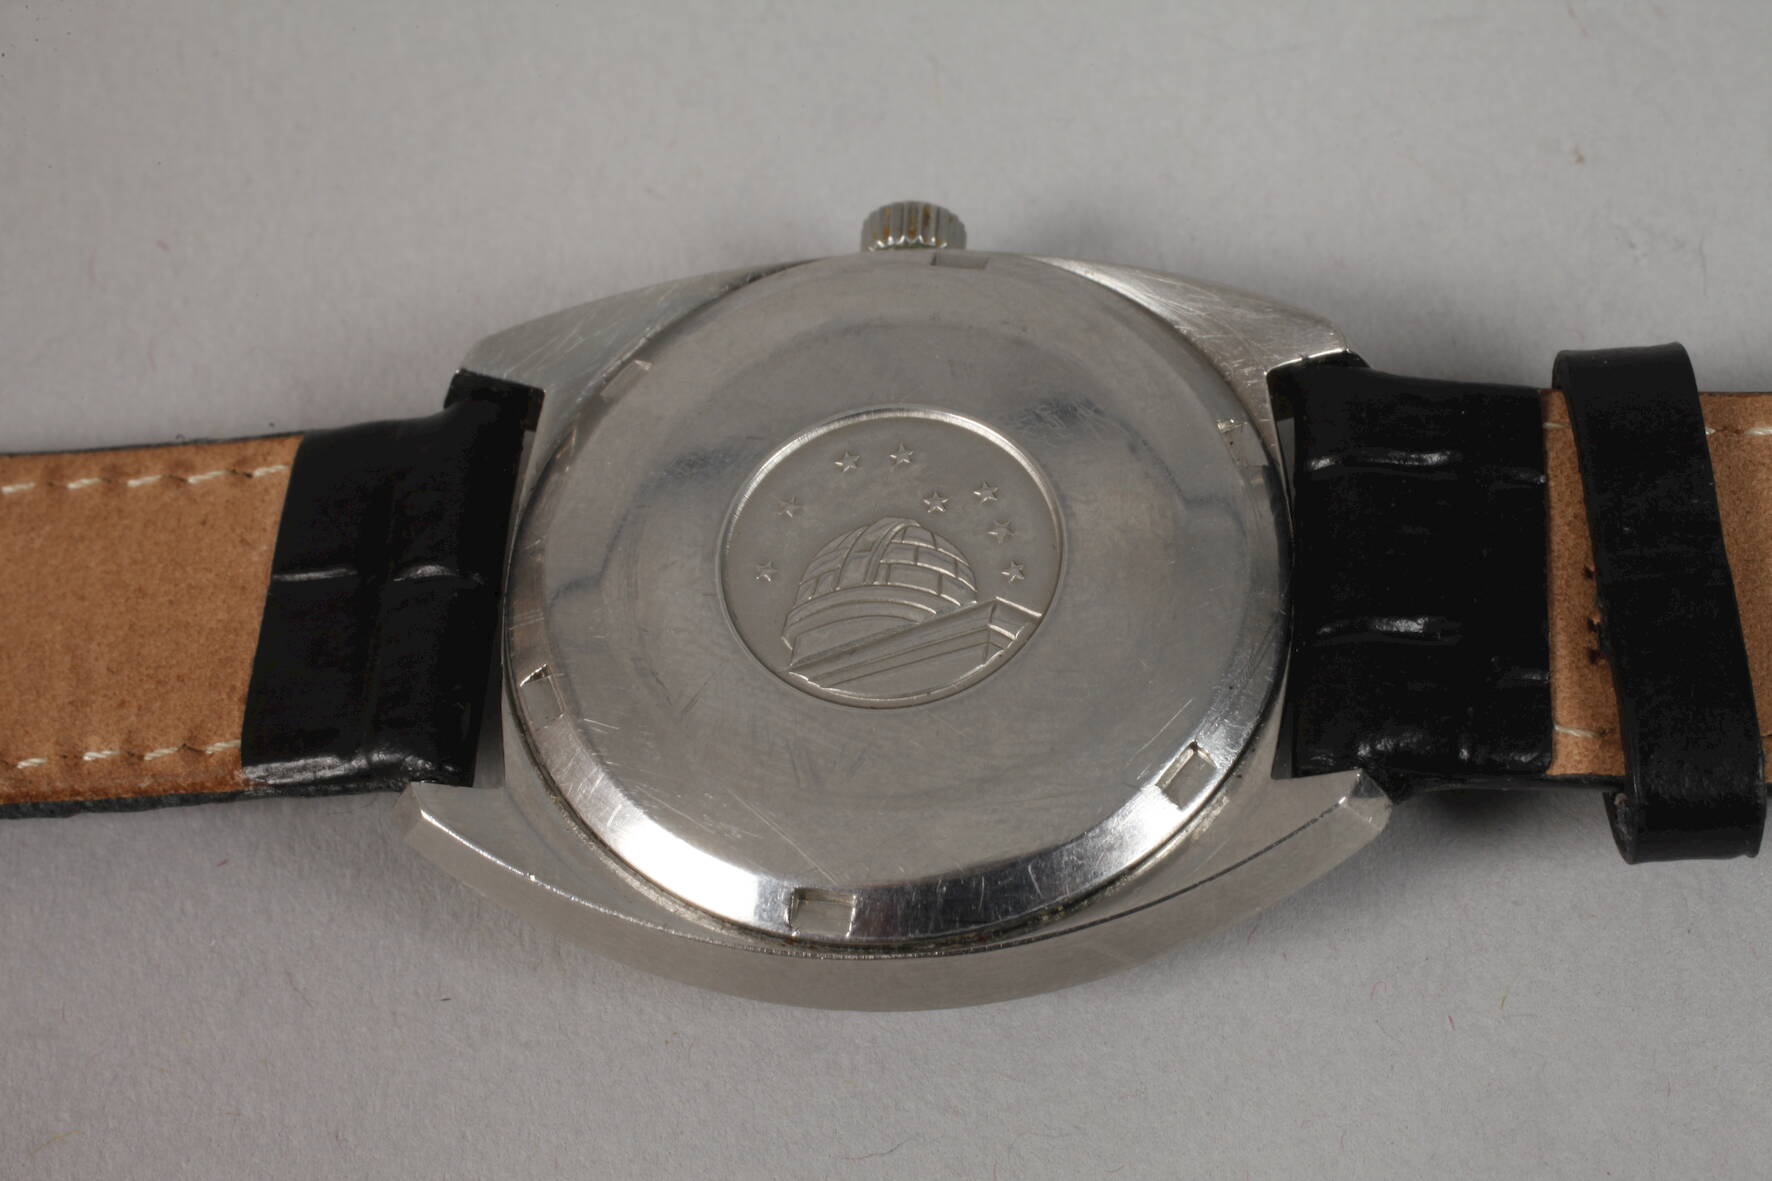 Wristwatch Omega Constellation - Image 3 of 4